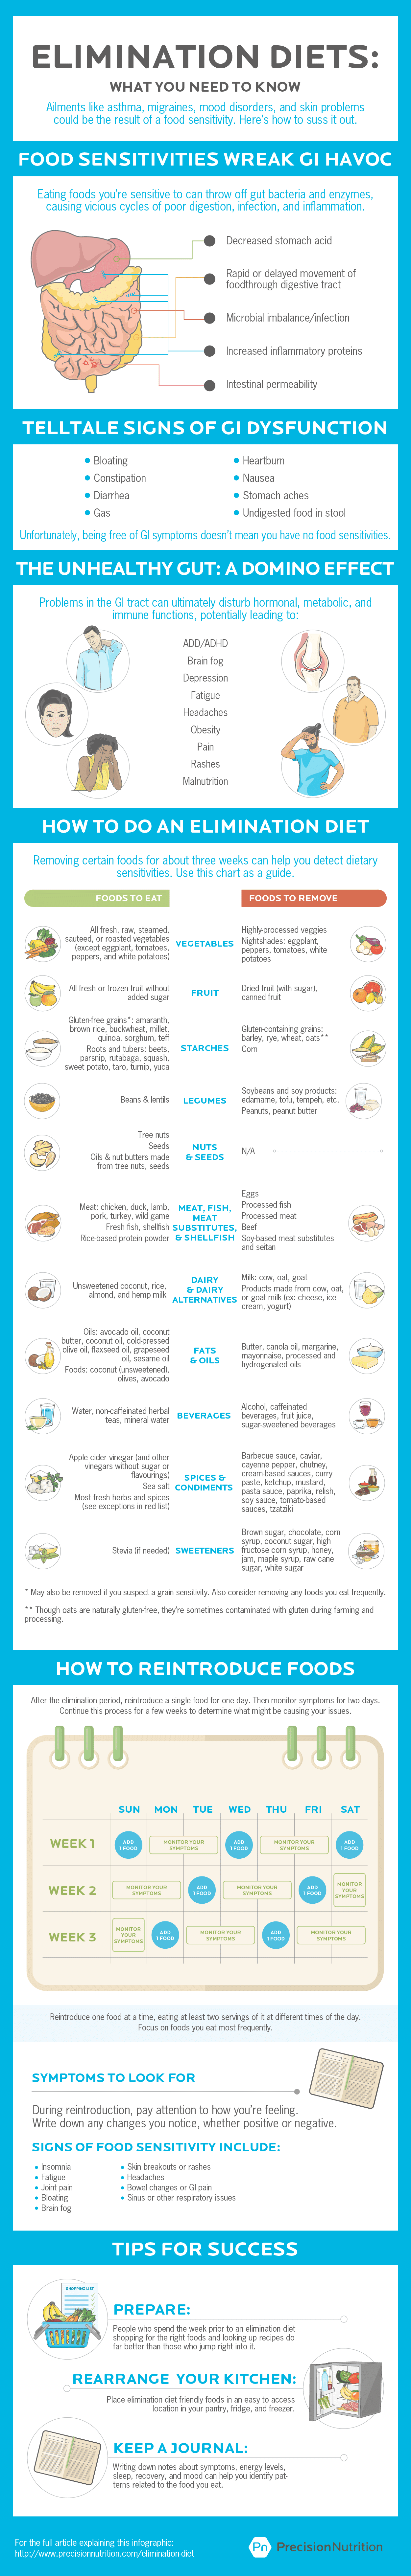 infographic on the elimination diet